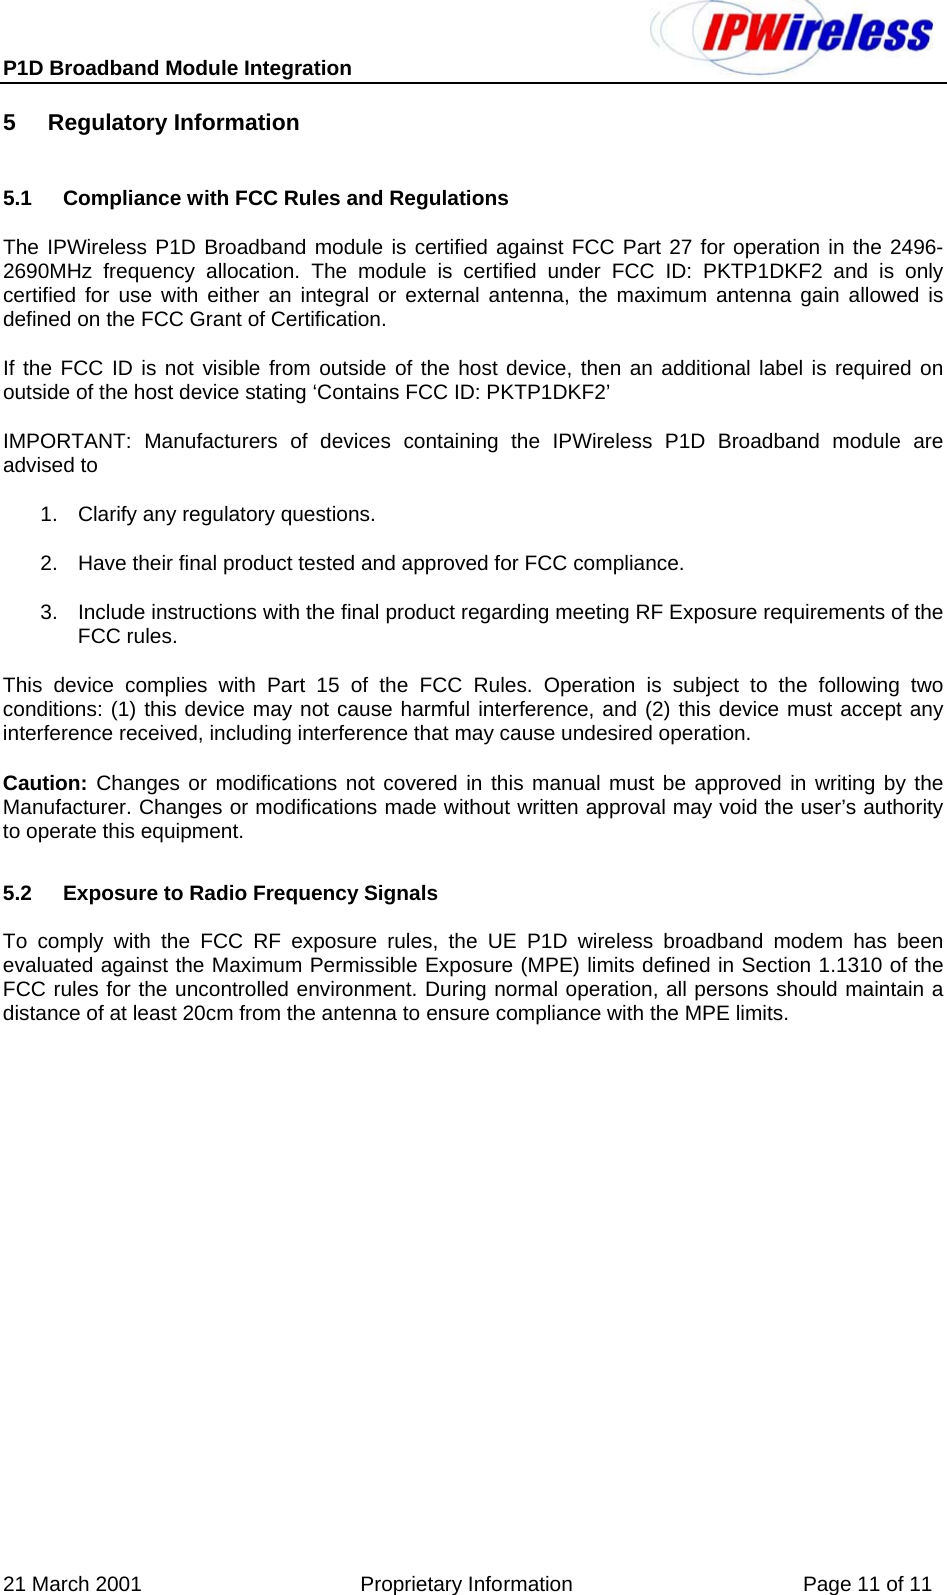 P1D Broadband Module Integration     21 March 2001                                      Proprietary Information                                        Page 11 of 11 5 Regulatory Information 5.1  Compliance with FCC Rules and Regulations The IPWireless P1D Broadband module is certified against FCC Part 27 for operation in the 2496-2690MHz frequency allocation. The module is certified under FCC ID: PKTP1DKF2 and is only certified for use with either an integral or external antenna, the maximum antenna gain allowed is defined on the FCC Grant of Certification. If the FCC ID is not visible from outside of the host device, then an additional label is required on outside of the host device stating ‘Contains FCC ID: PKTP1DKF2’ IMPORTANT: Manufacturers of devices containing the IPWireless P1D Broadband module are advised to  1.  Clarify any regulatory questions. 2.  Have their final product tested and approved for FCC compliance. 3.  Include instructions with the final product regarding meeting RF Exposure requirements of the FCC rules. This device complies with Part 15 of the FCC Rules. Operation is subject to the following two conditions: (1) this device may not cause harmful interference, and (2) this device must accept any interference received, including interference that may cause undesired operation. Caution: Changes or modifications not covered in this manual must be approved in writing by the Manufacturer. Changes or modifications made without written approval may void the user’s authority to operate this equipment. 5.2  Exposure to Radio Frequency Signals To comply with the FCC RF exposure rules, the UE P1D wireless broadband modem has been evaluated against the Maximum Permissible Exposure (MPE) limits defined in Section 1.1310 of the FCC rules for the uncontrolled environment. During normal operation, all persons should maintain a distance of at least 20cm from the antenna to ensure compliance with the MPE limits. 